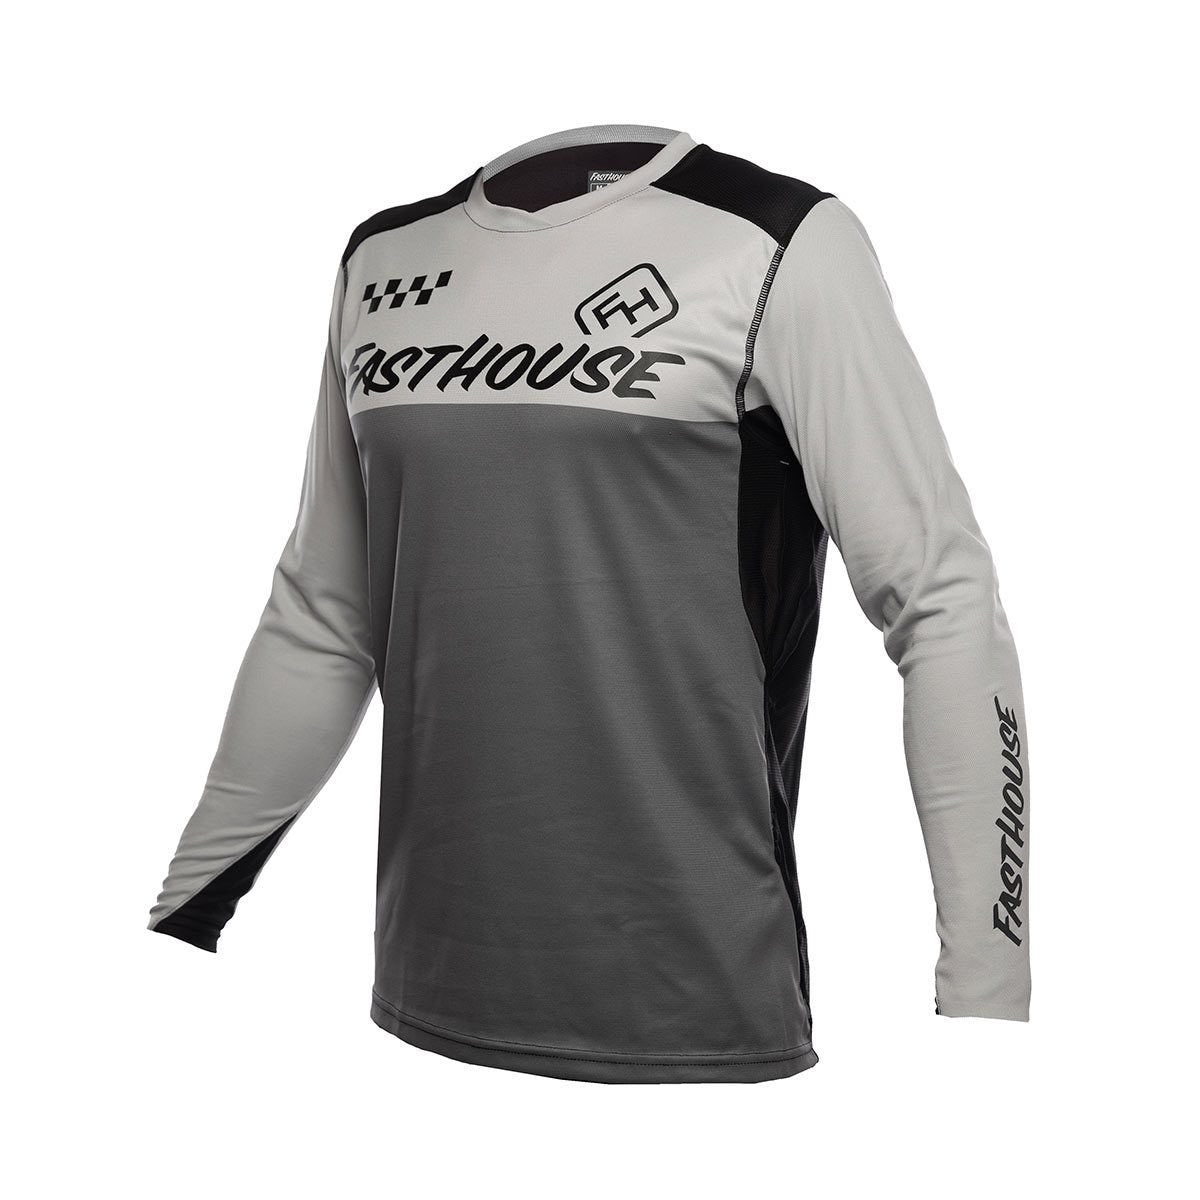 Fasthouse - Alloy Block LS  Jersey - Silver/Charcoal